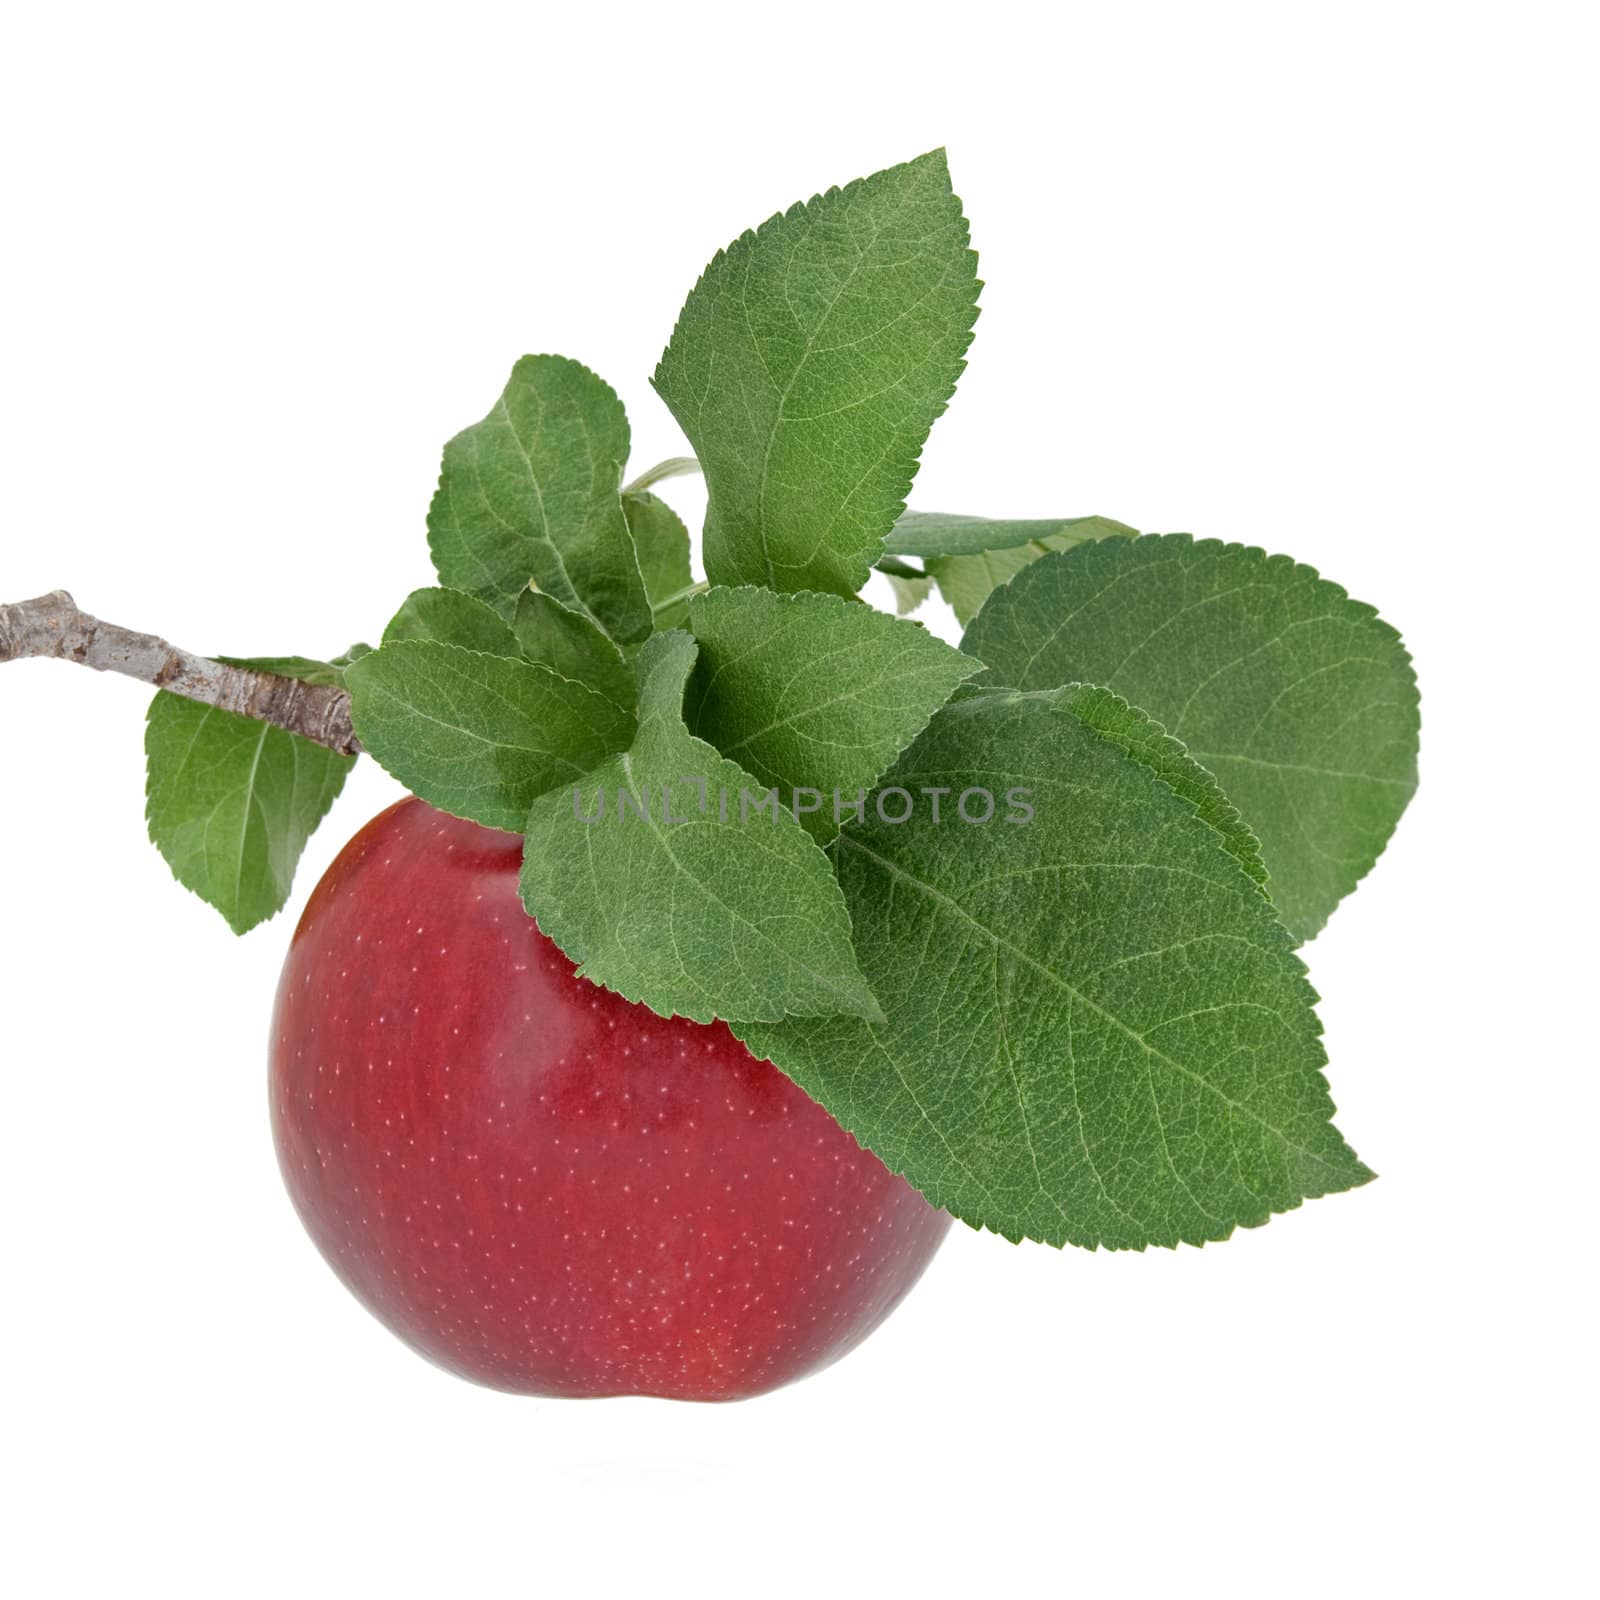 Ripe red apple with green leaves on a branch, isolated on white background.